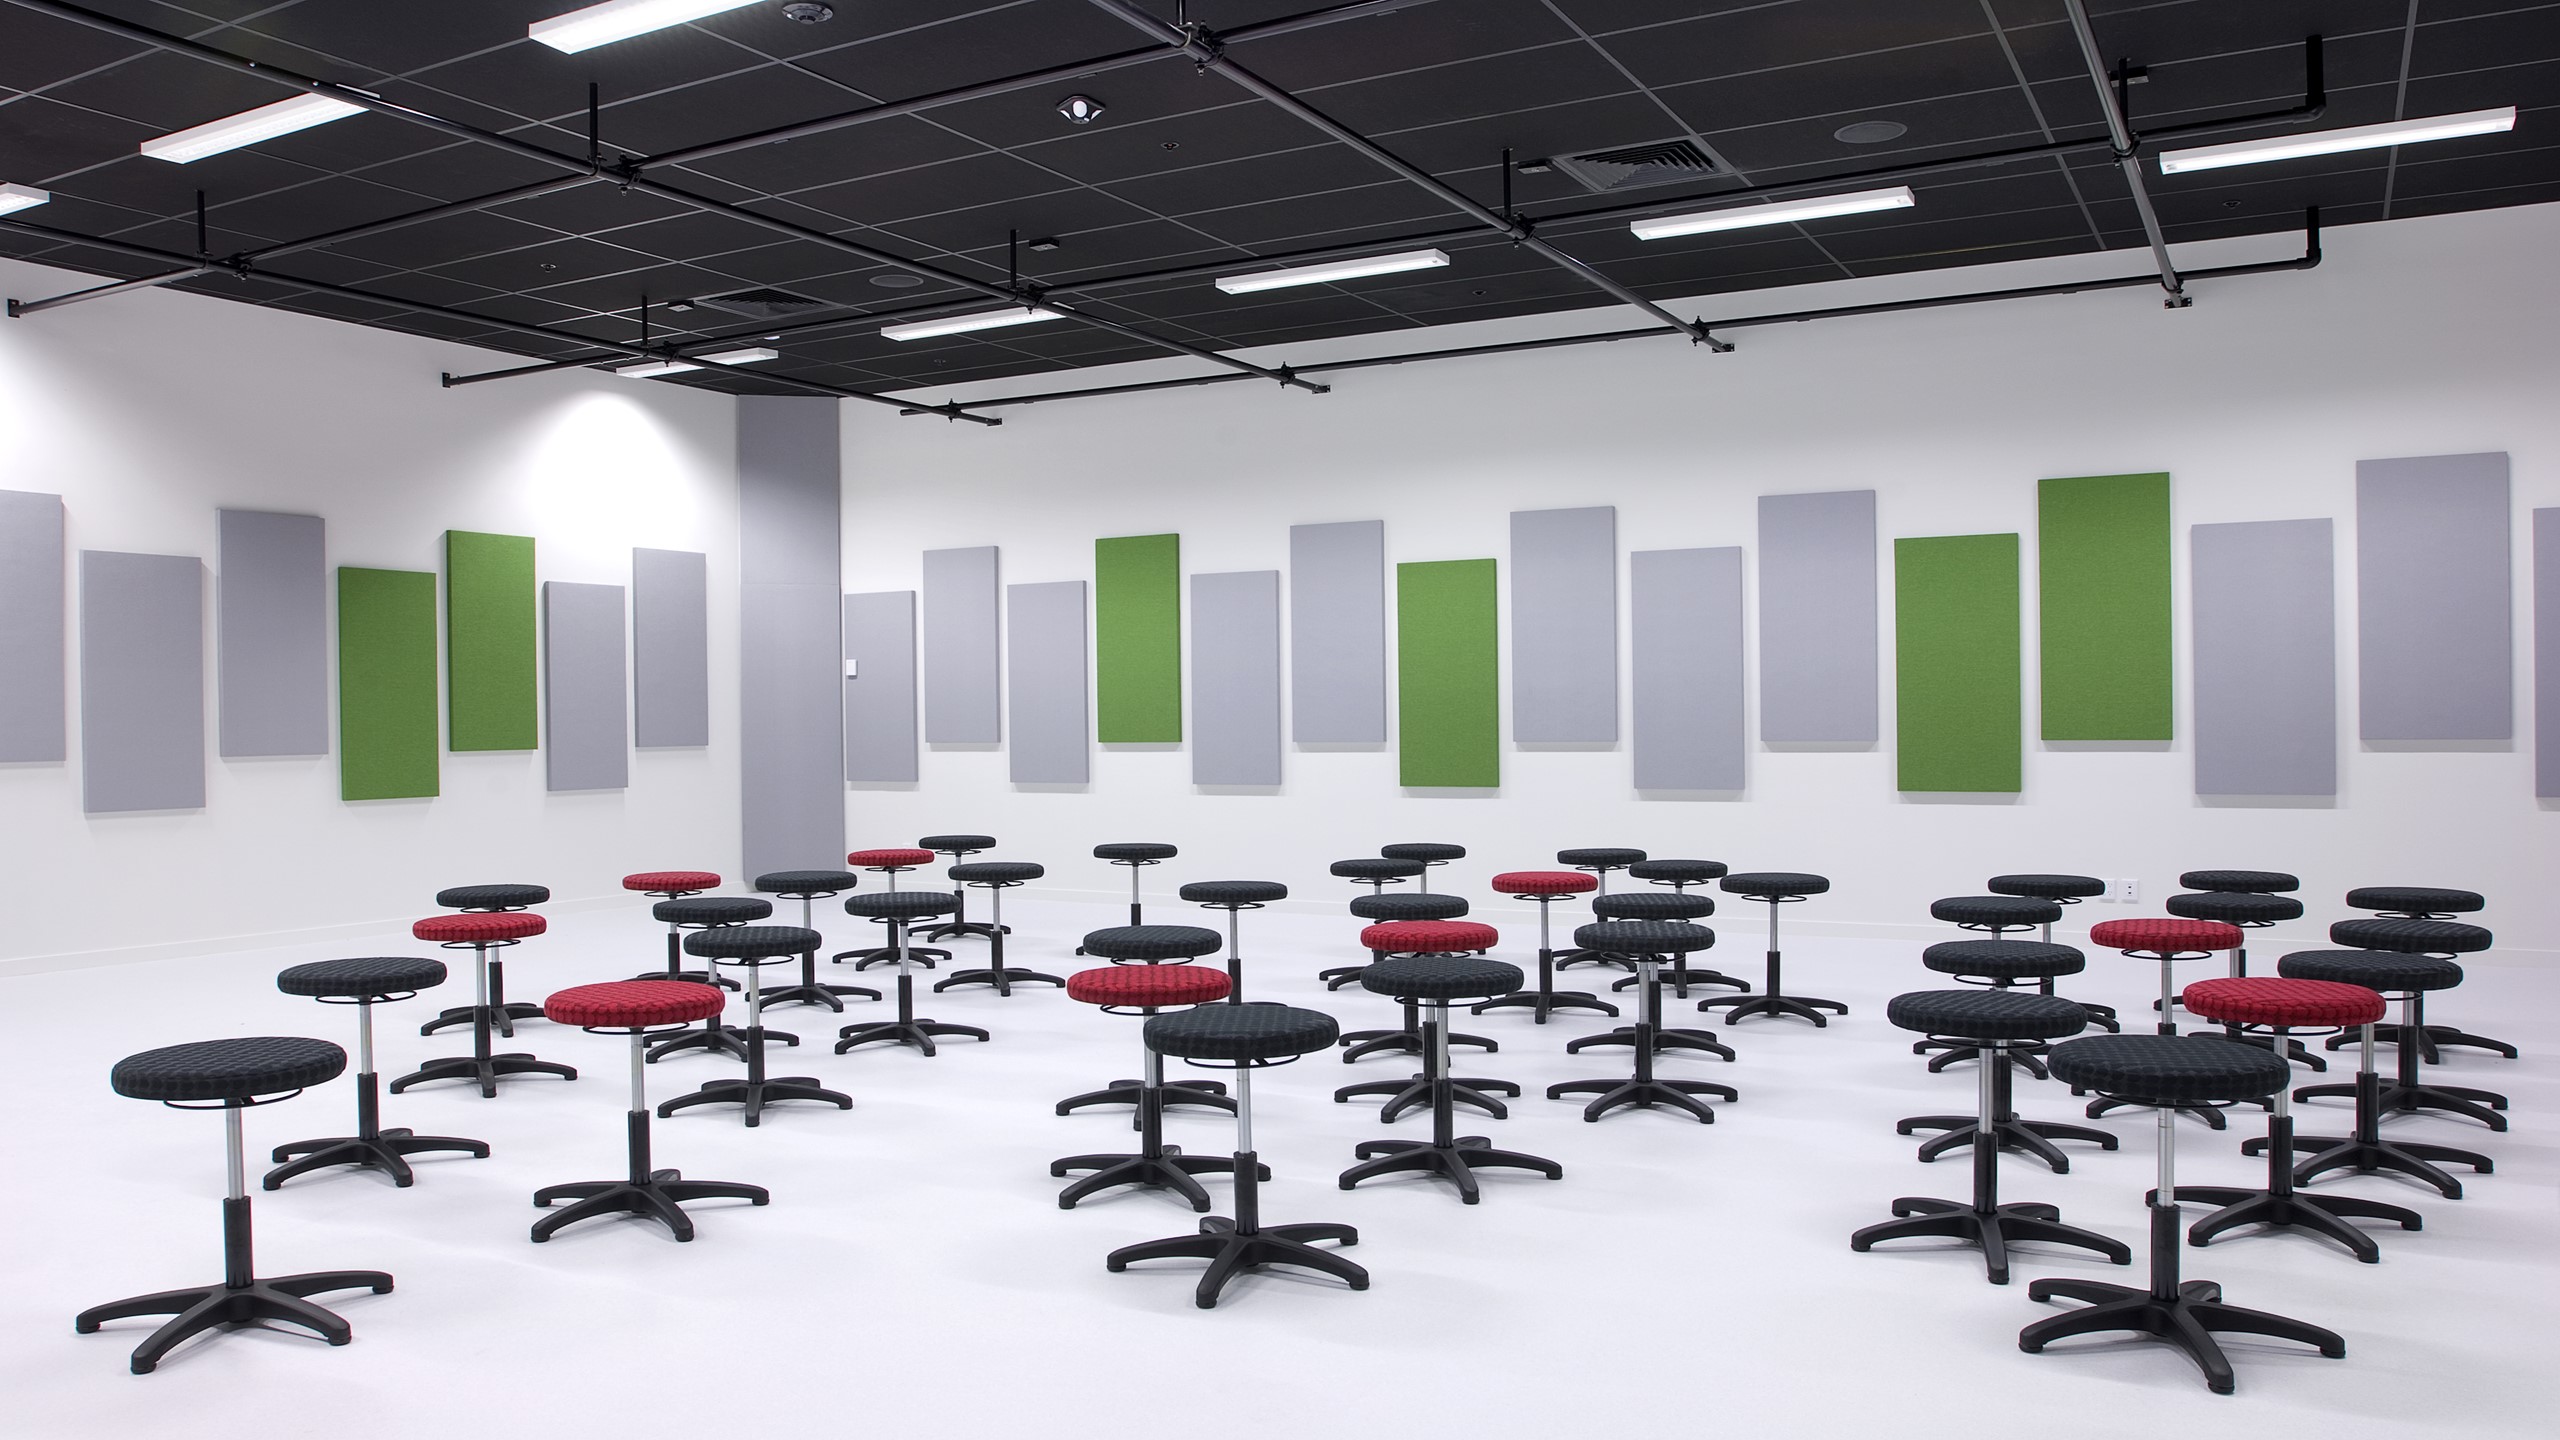 Hobsonville Point Intermediate Music Room showing direct fixed rectangular Fabwall panels wrapped in grey and green fabrics